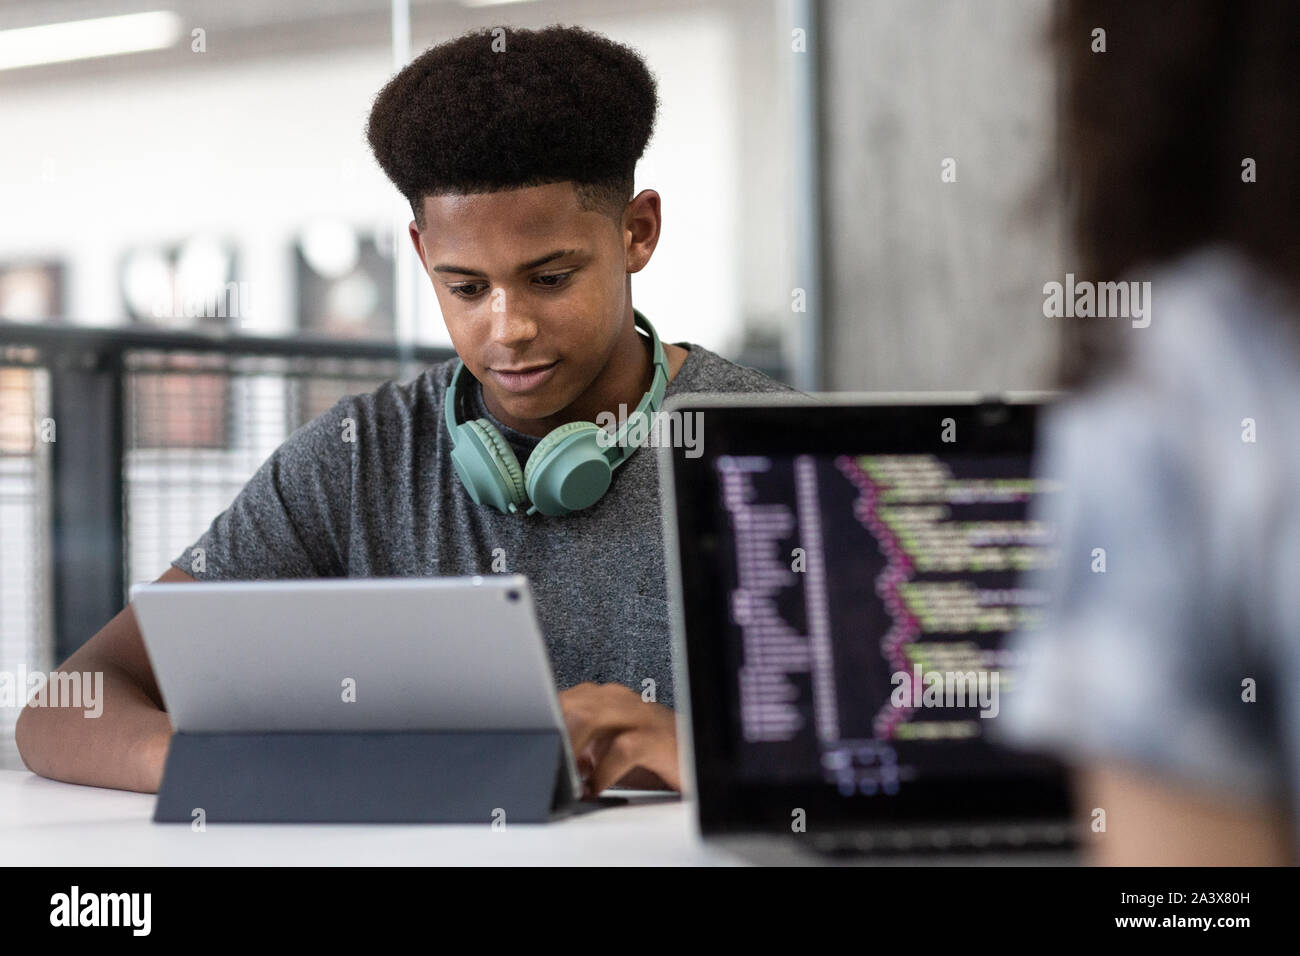 African American male student coding in class Banque D'Images